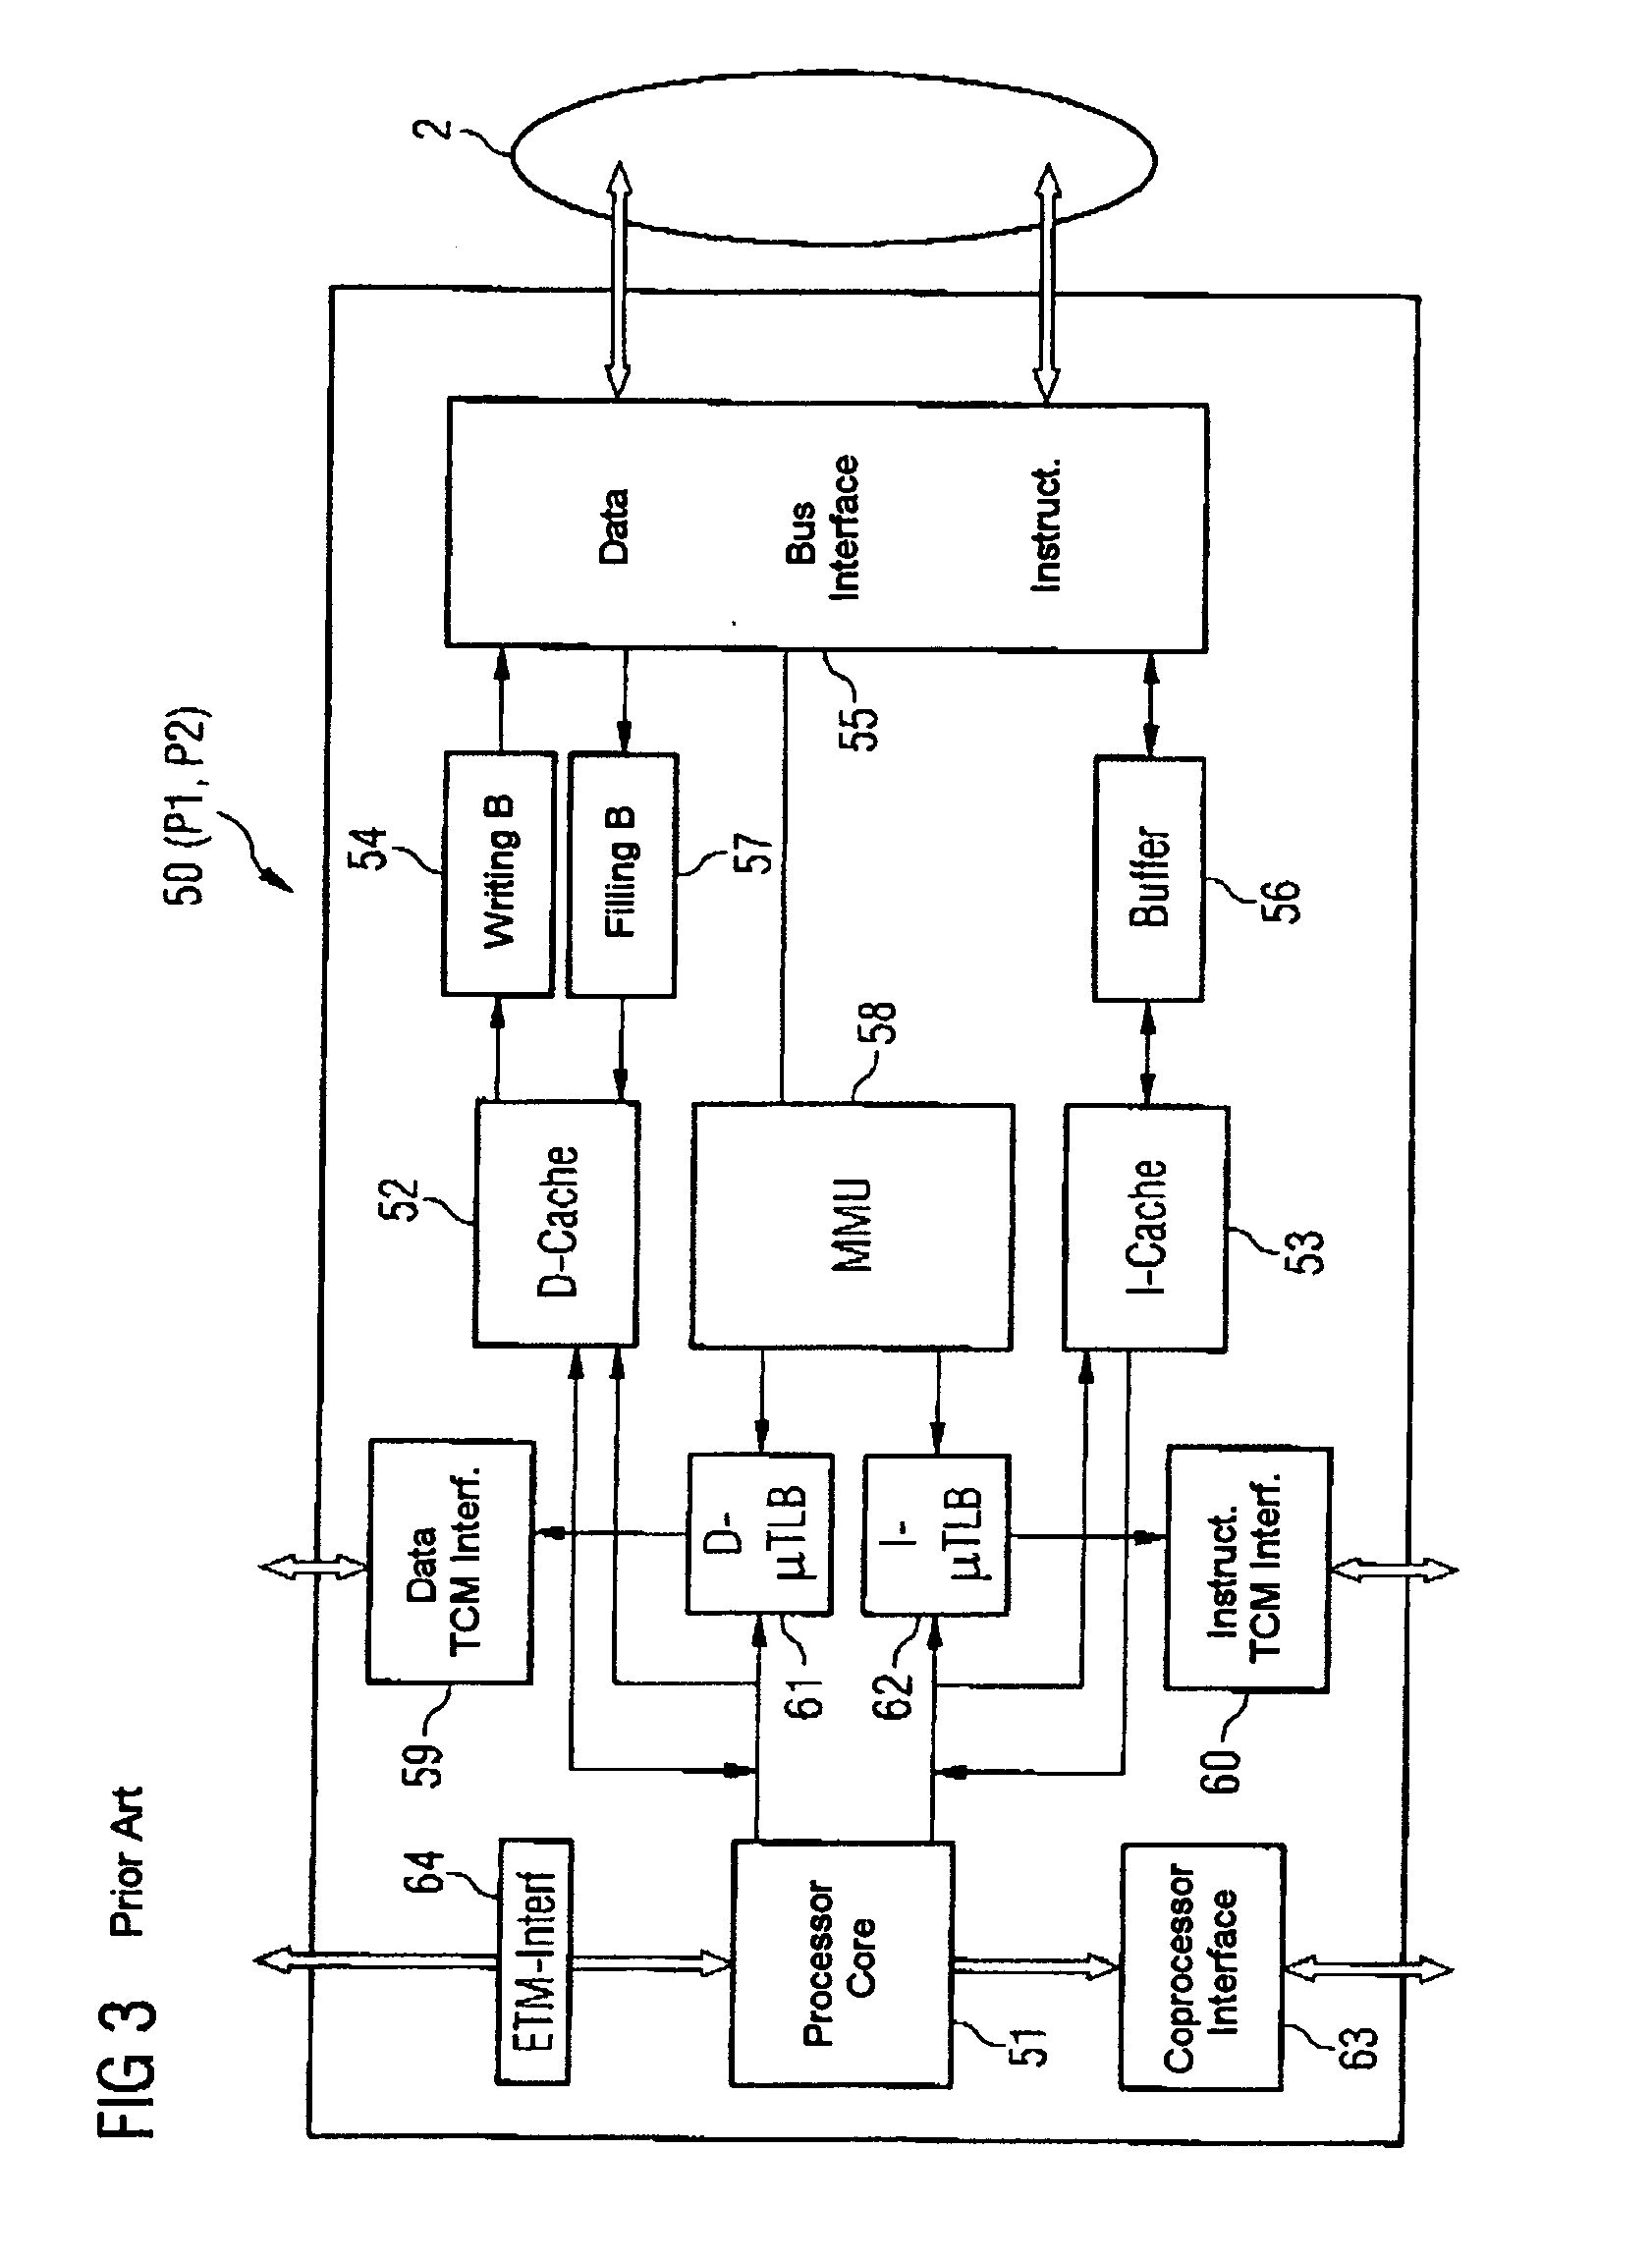 Multiprocessor system having a shared tightly coupled memory and method for communication between a plurality of processors